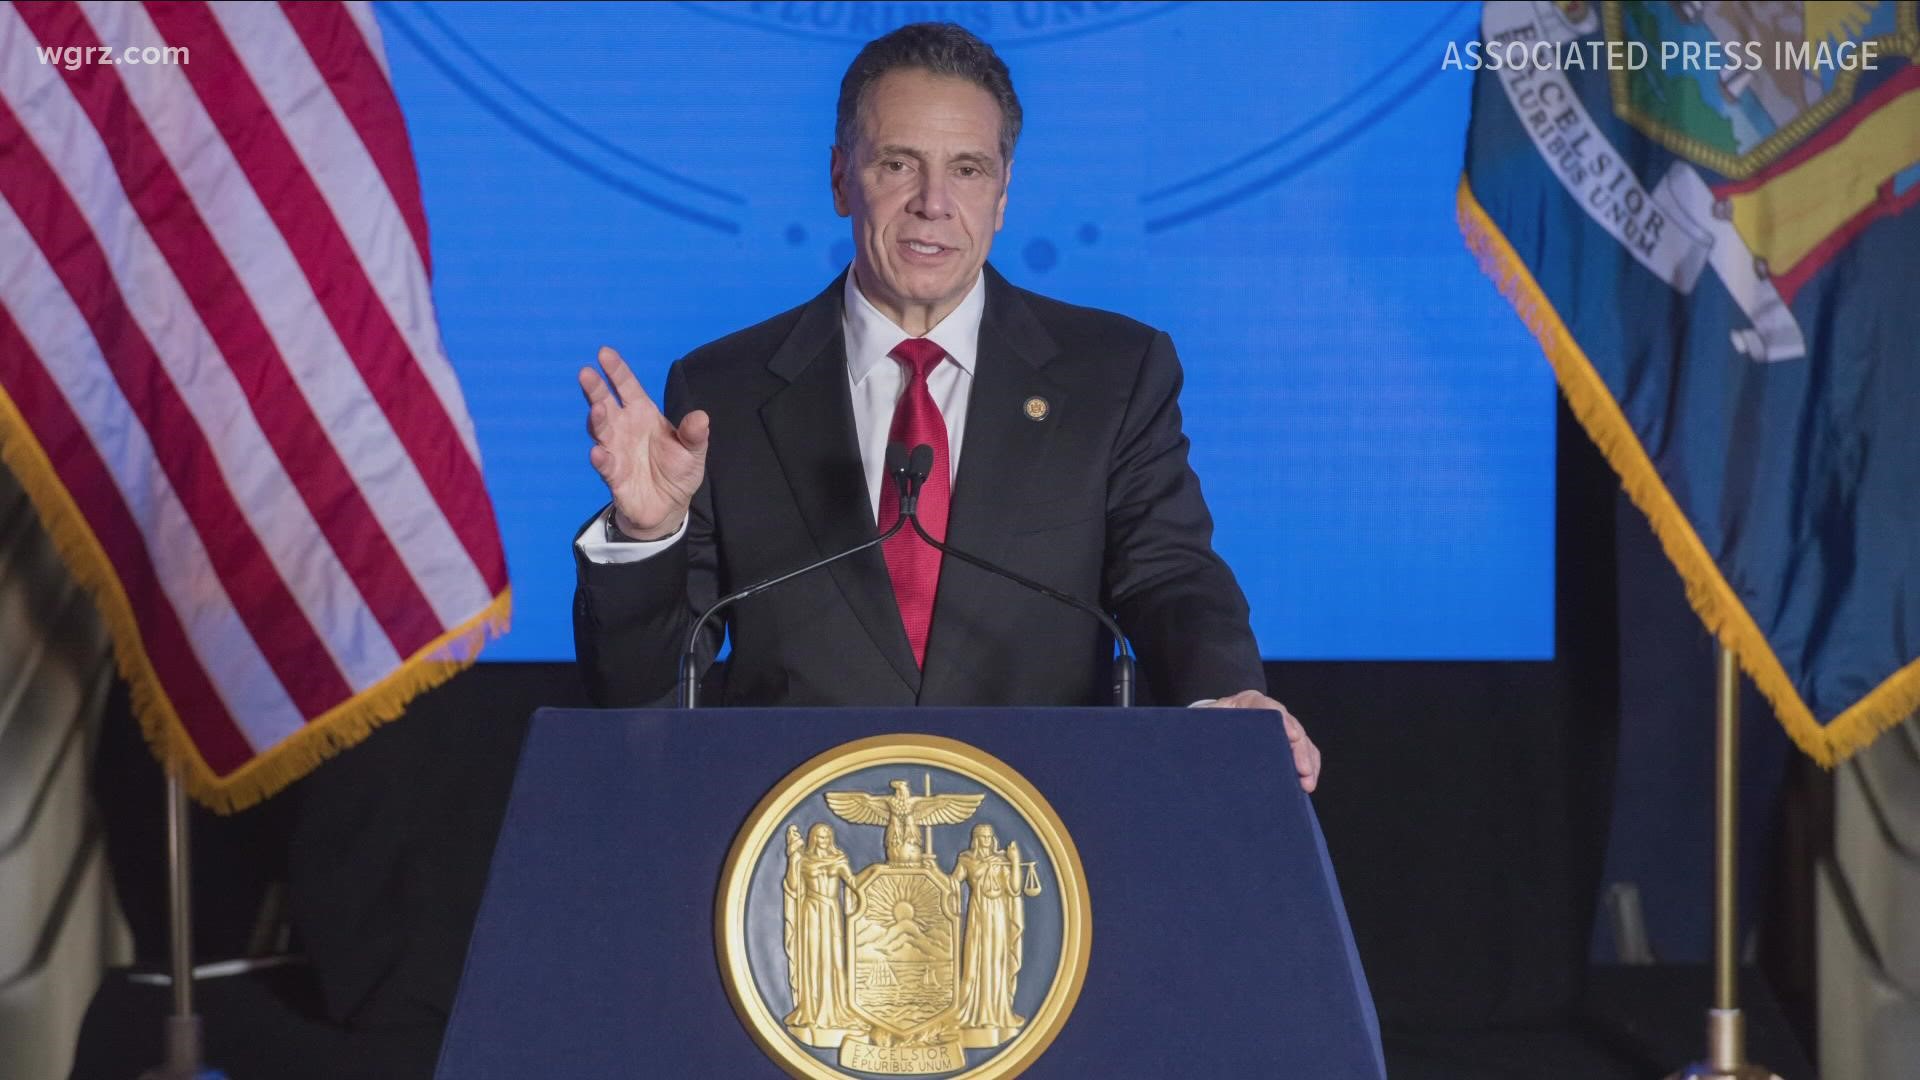 We break down what some political analysts are saying could be in the cards for Andrew Cuomo.